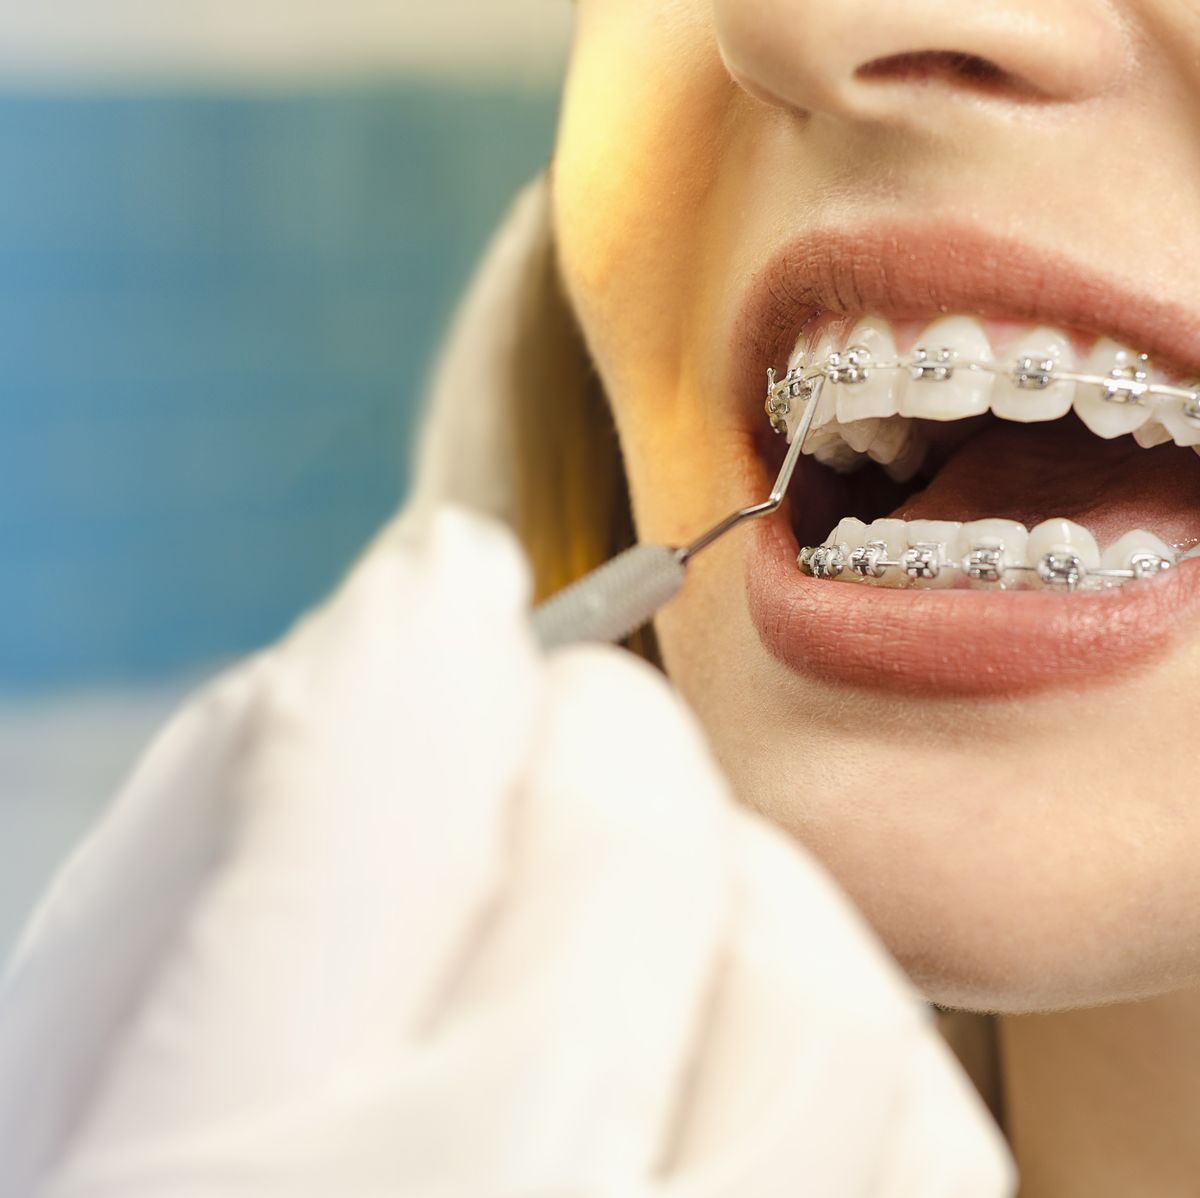 Types of Dental Braces - How & Who Makes Them?